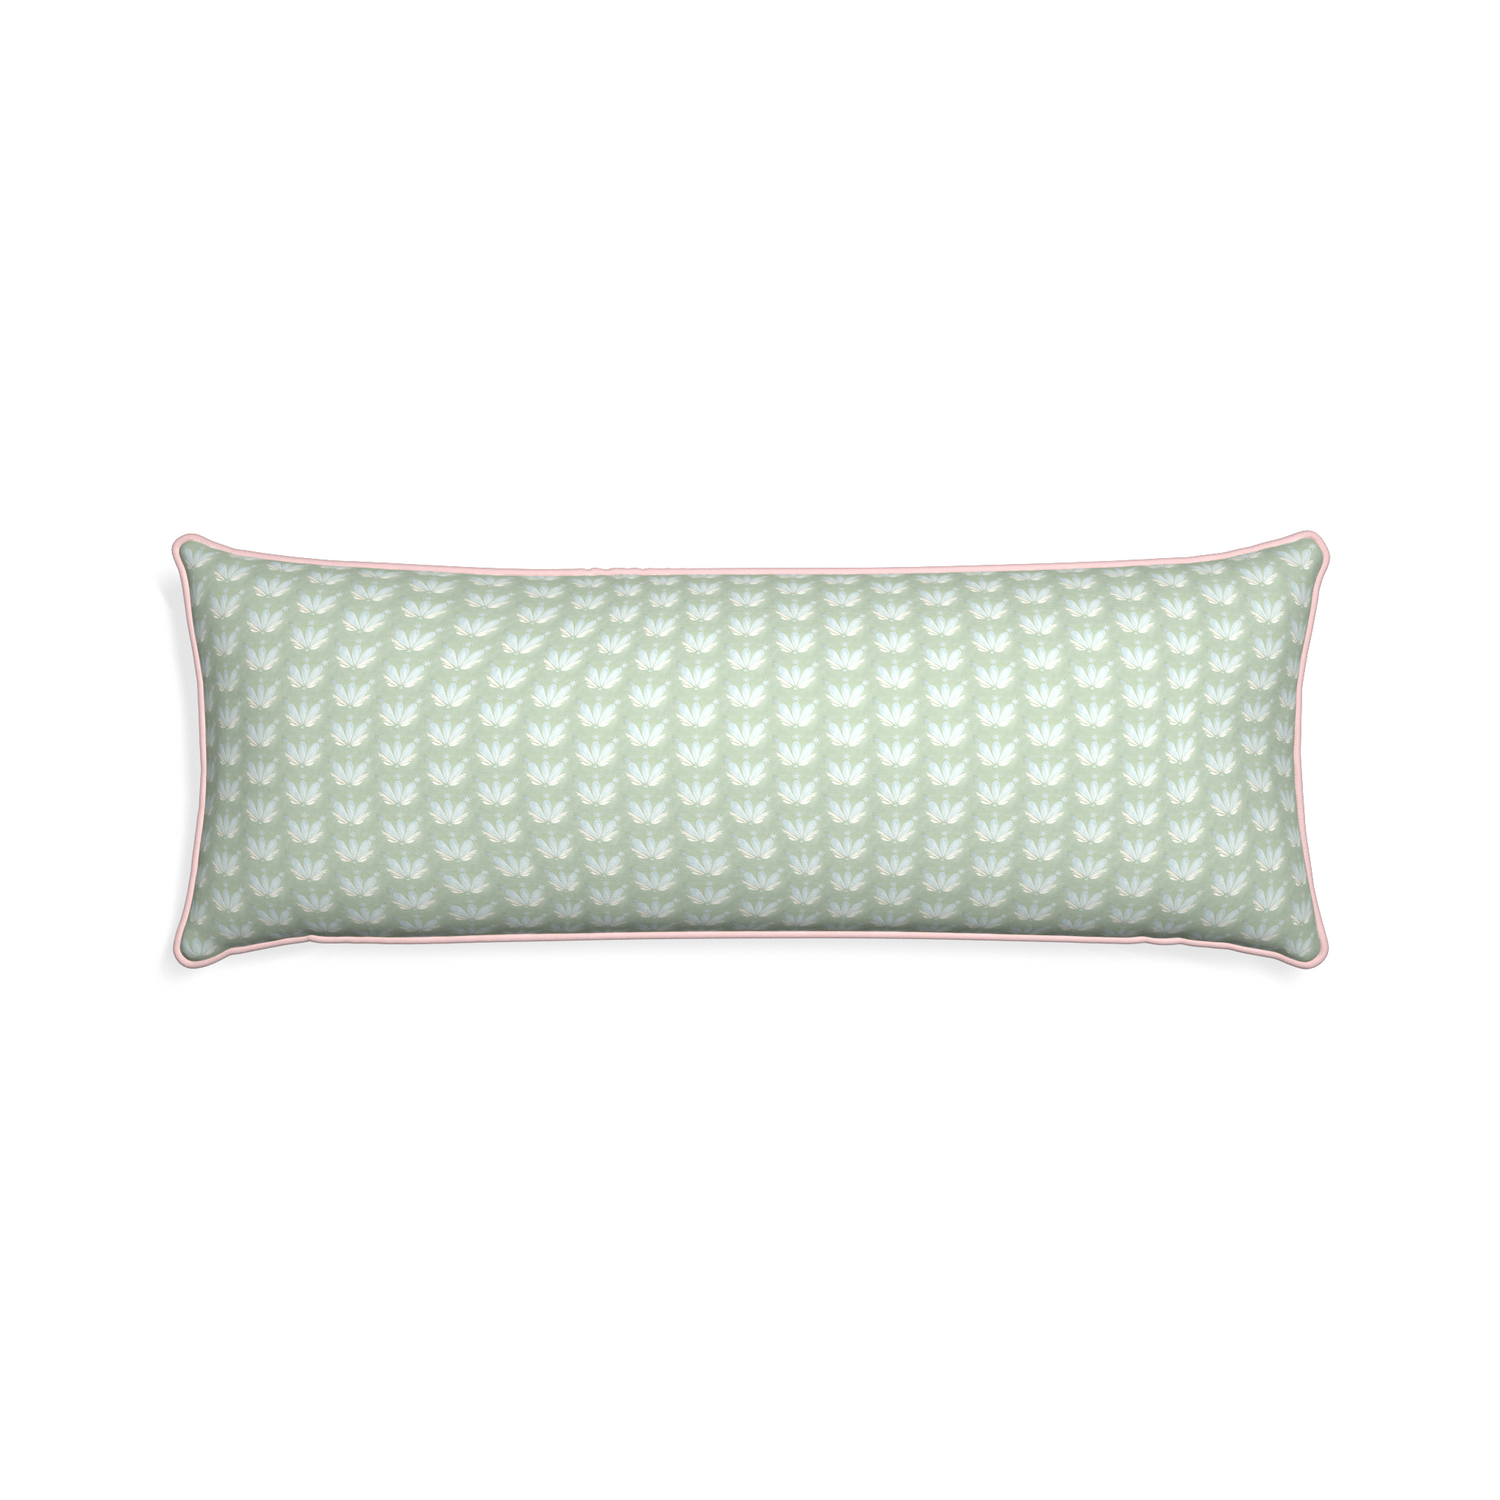 Xl-lumbar serena sea salt custom blue & green floral drop repeatpillow with petal piping on white background